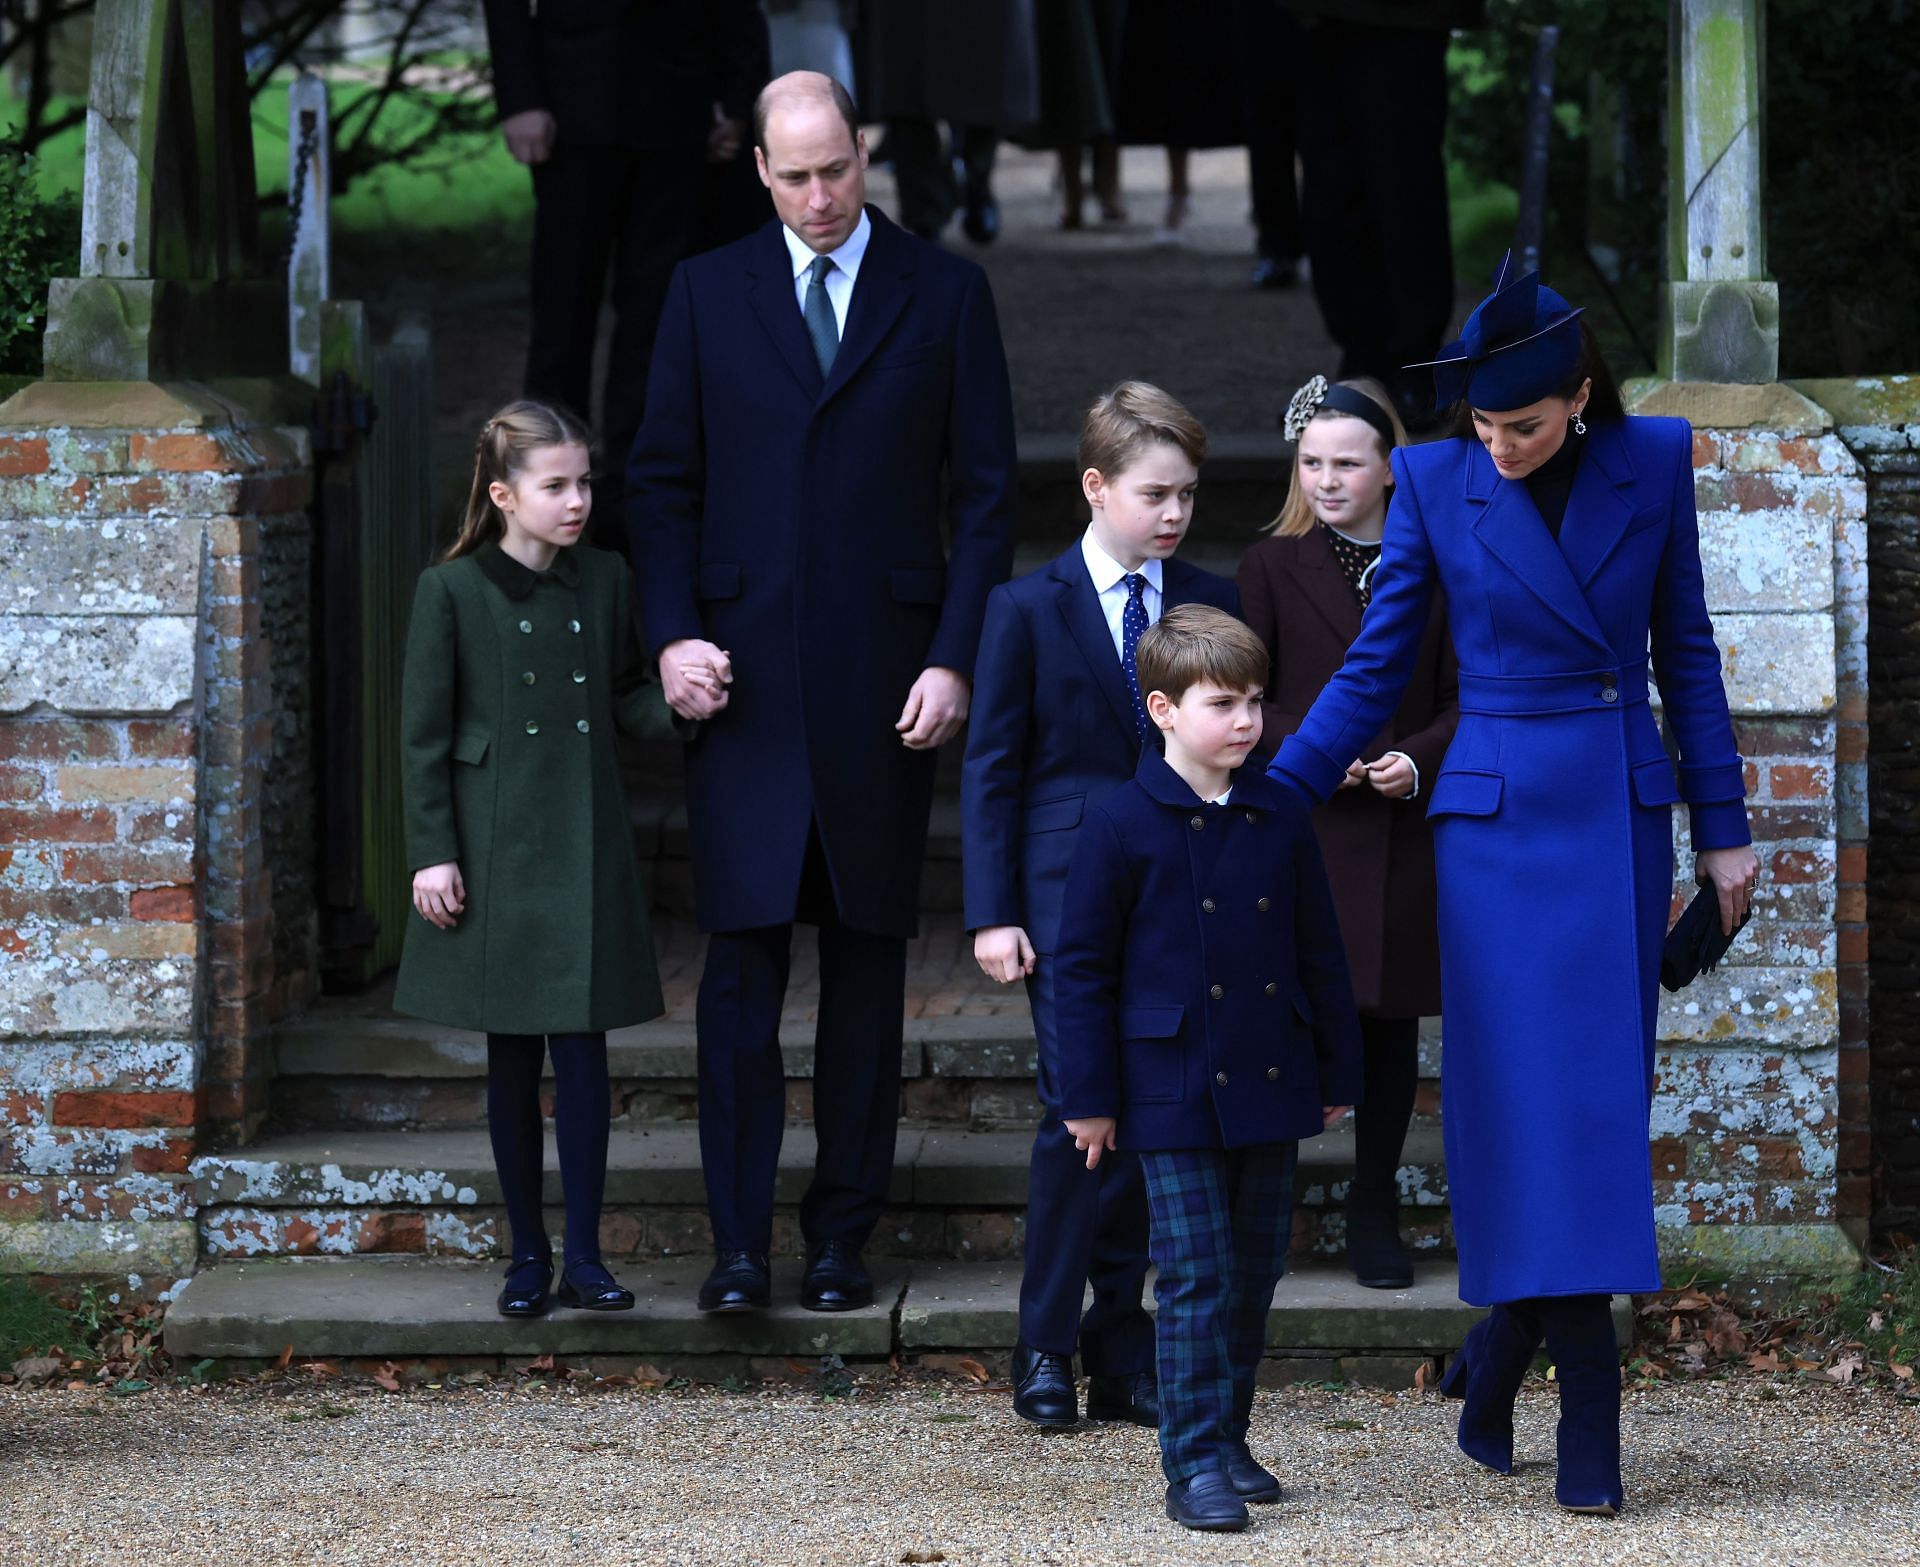  (L-R) Princess Charlotte, Prince William, Prince of Wales, Prince George, Prince Louis, Mia Tindall, and Catherine, Princess of Wales, attend the Christmas Morning Service at Sandringham Church on December 25, 2023 (Image via Getty)